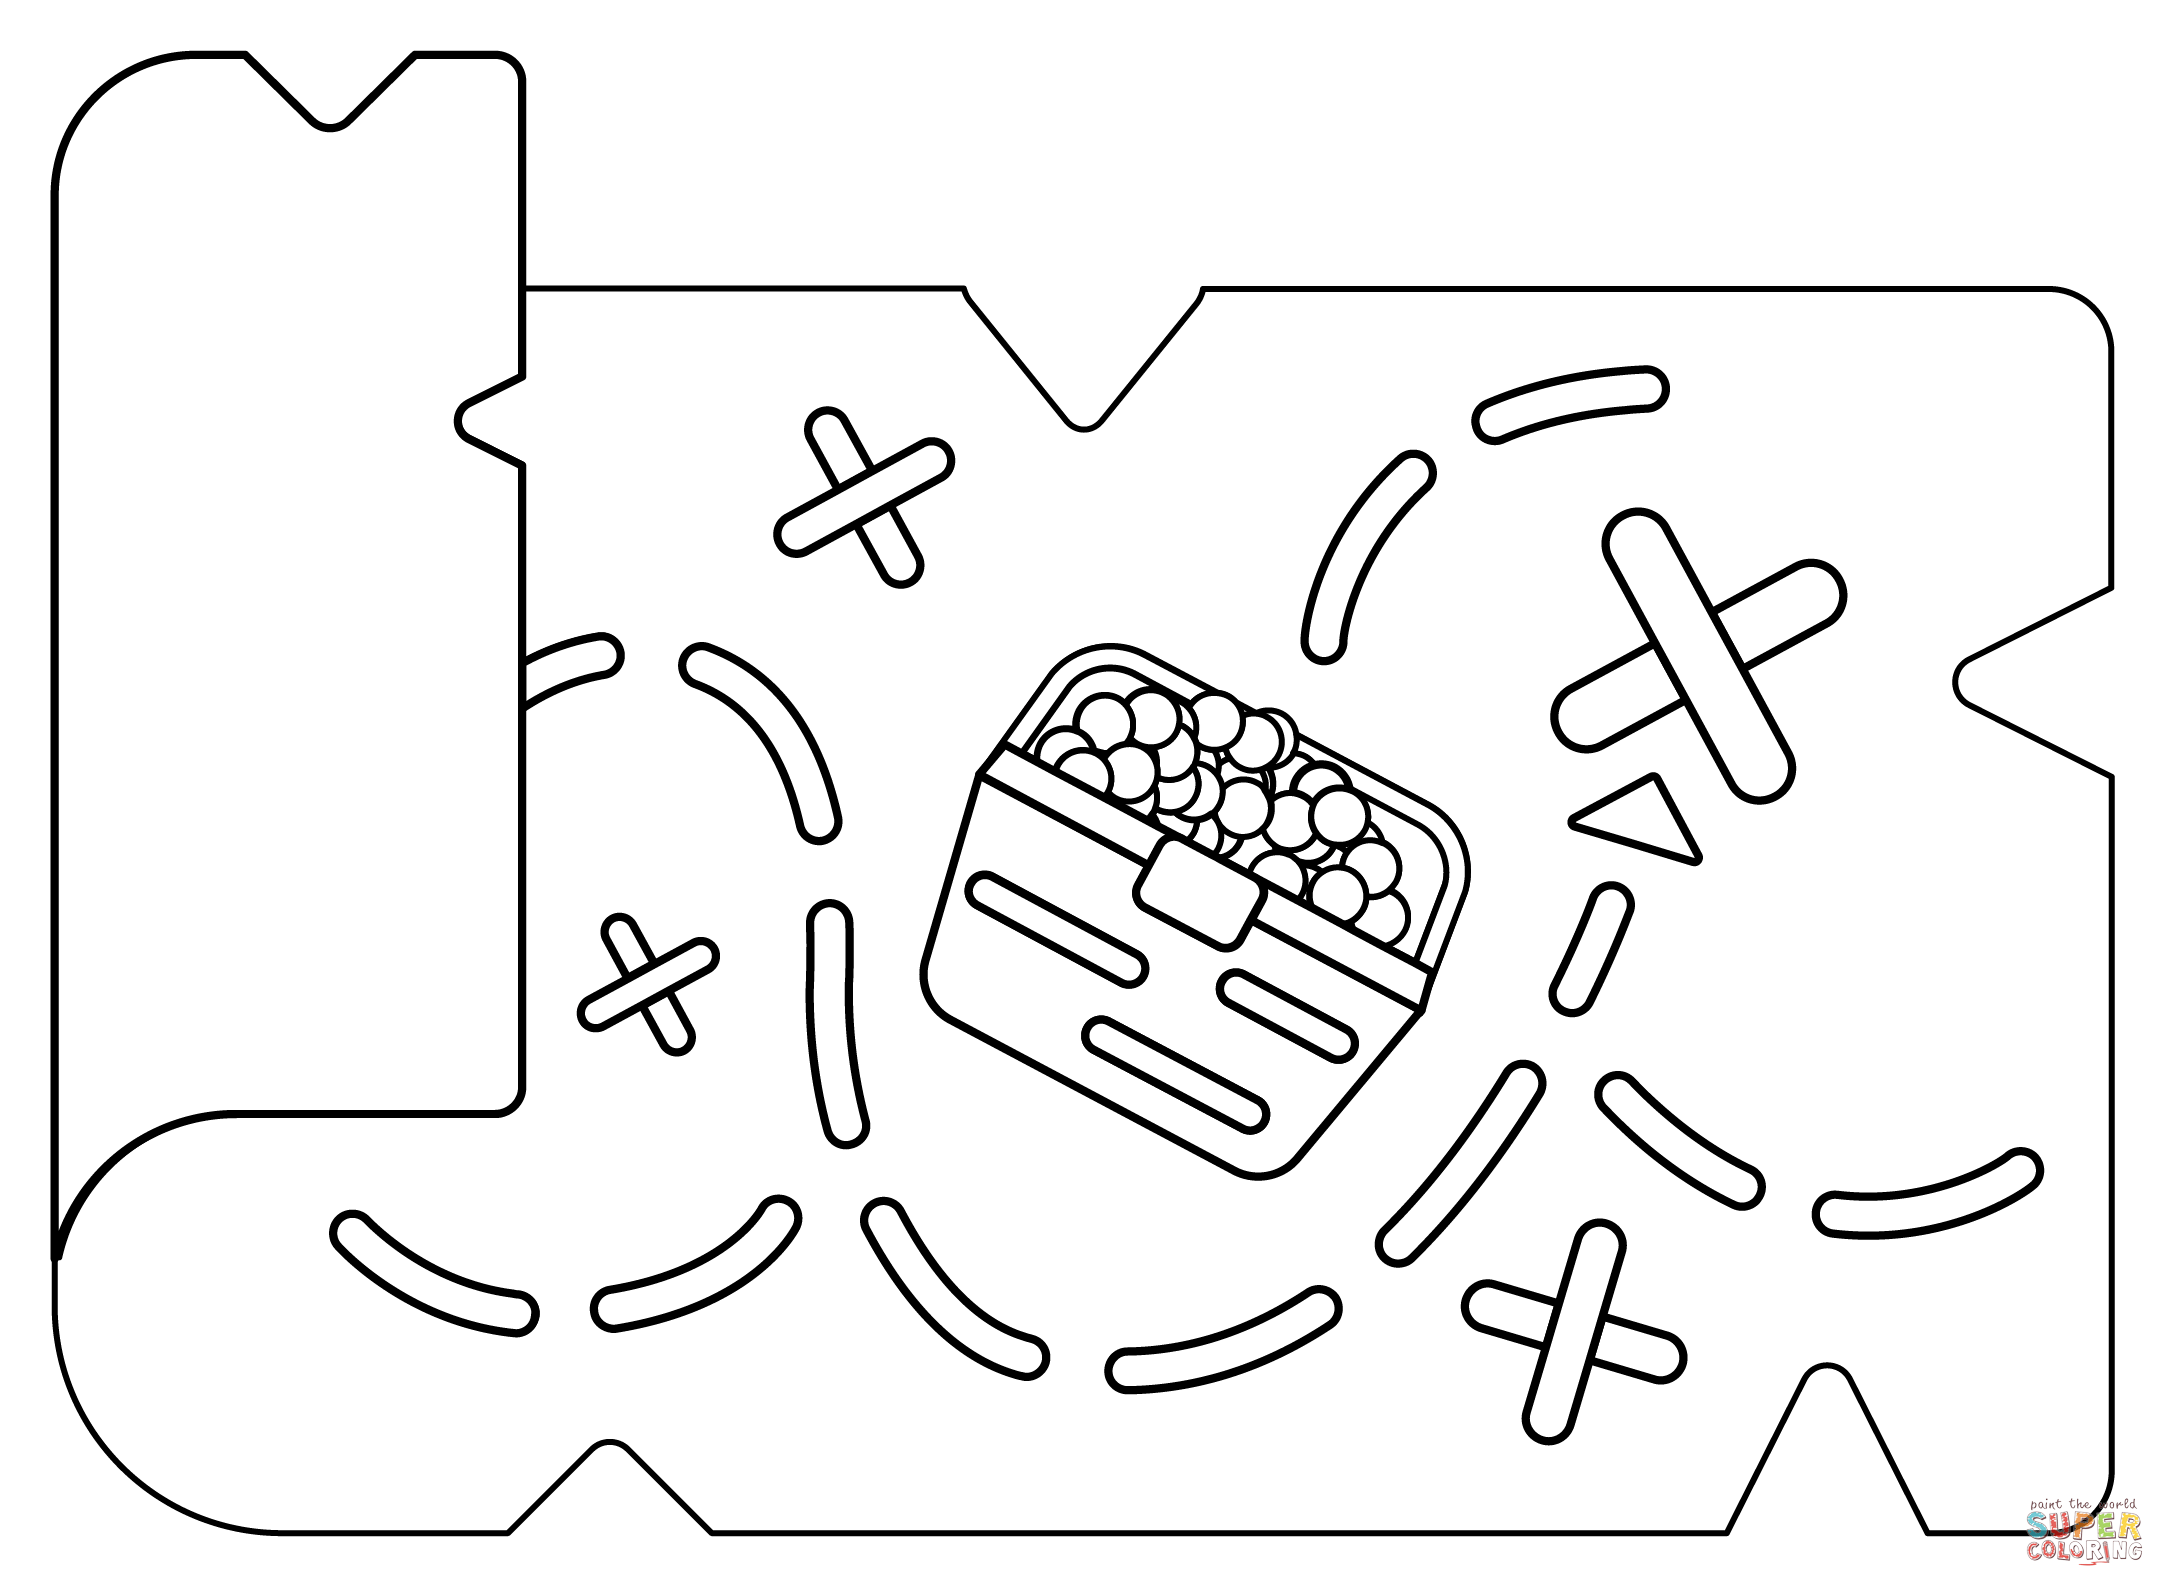 Treasure map coloring page free printable coloring pages